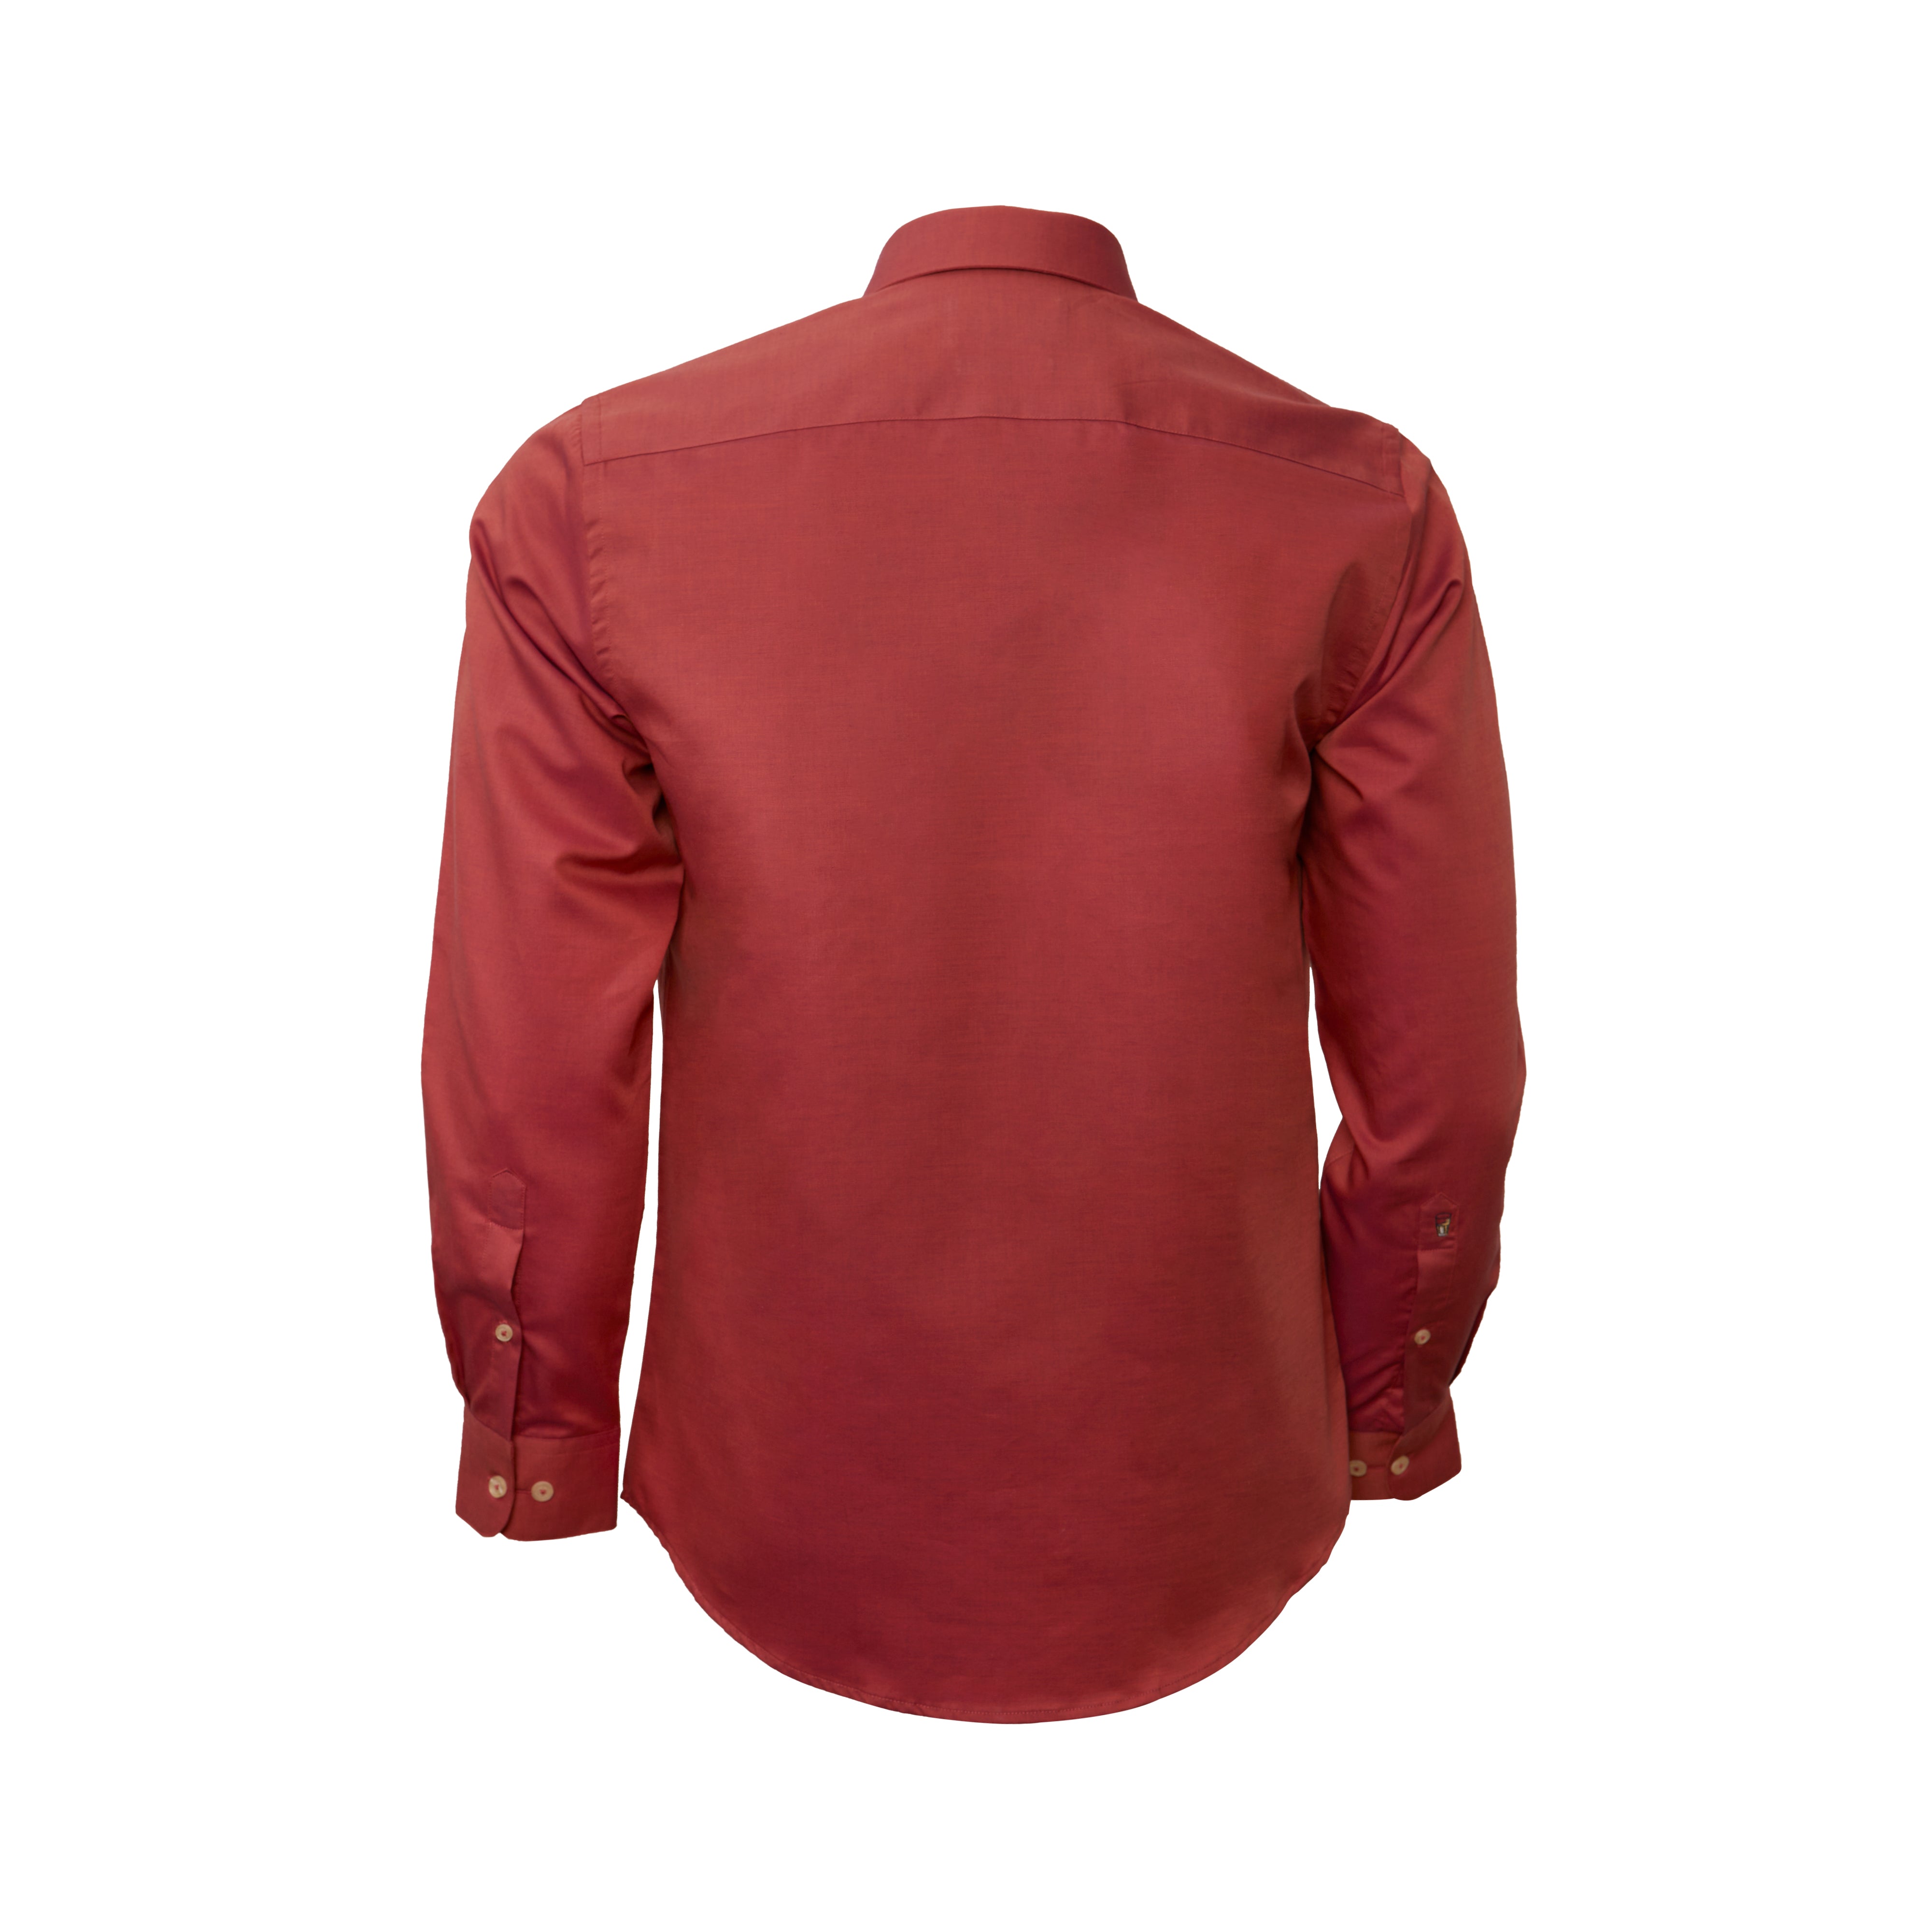 Supima Cotton Coral Red Full-sleeved shirt